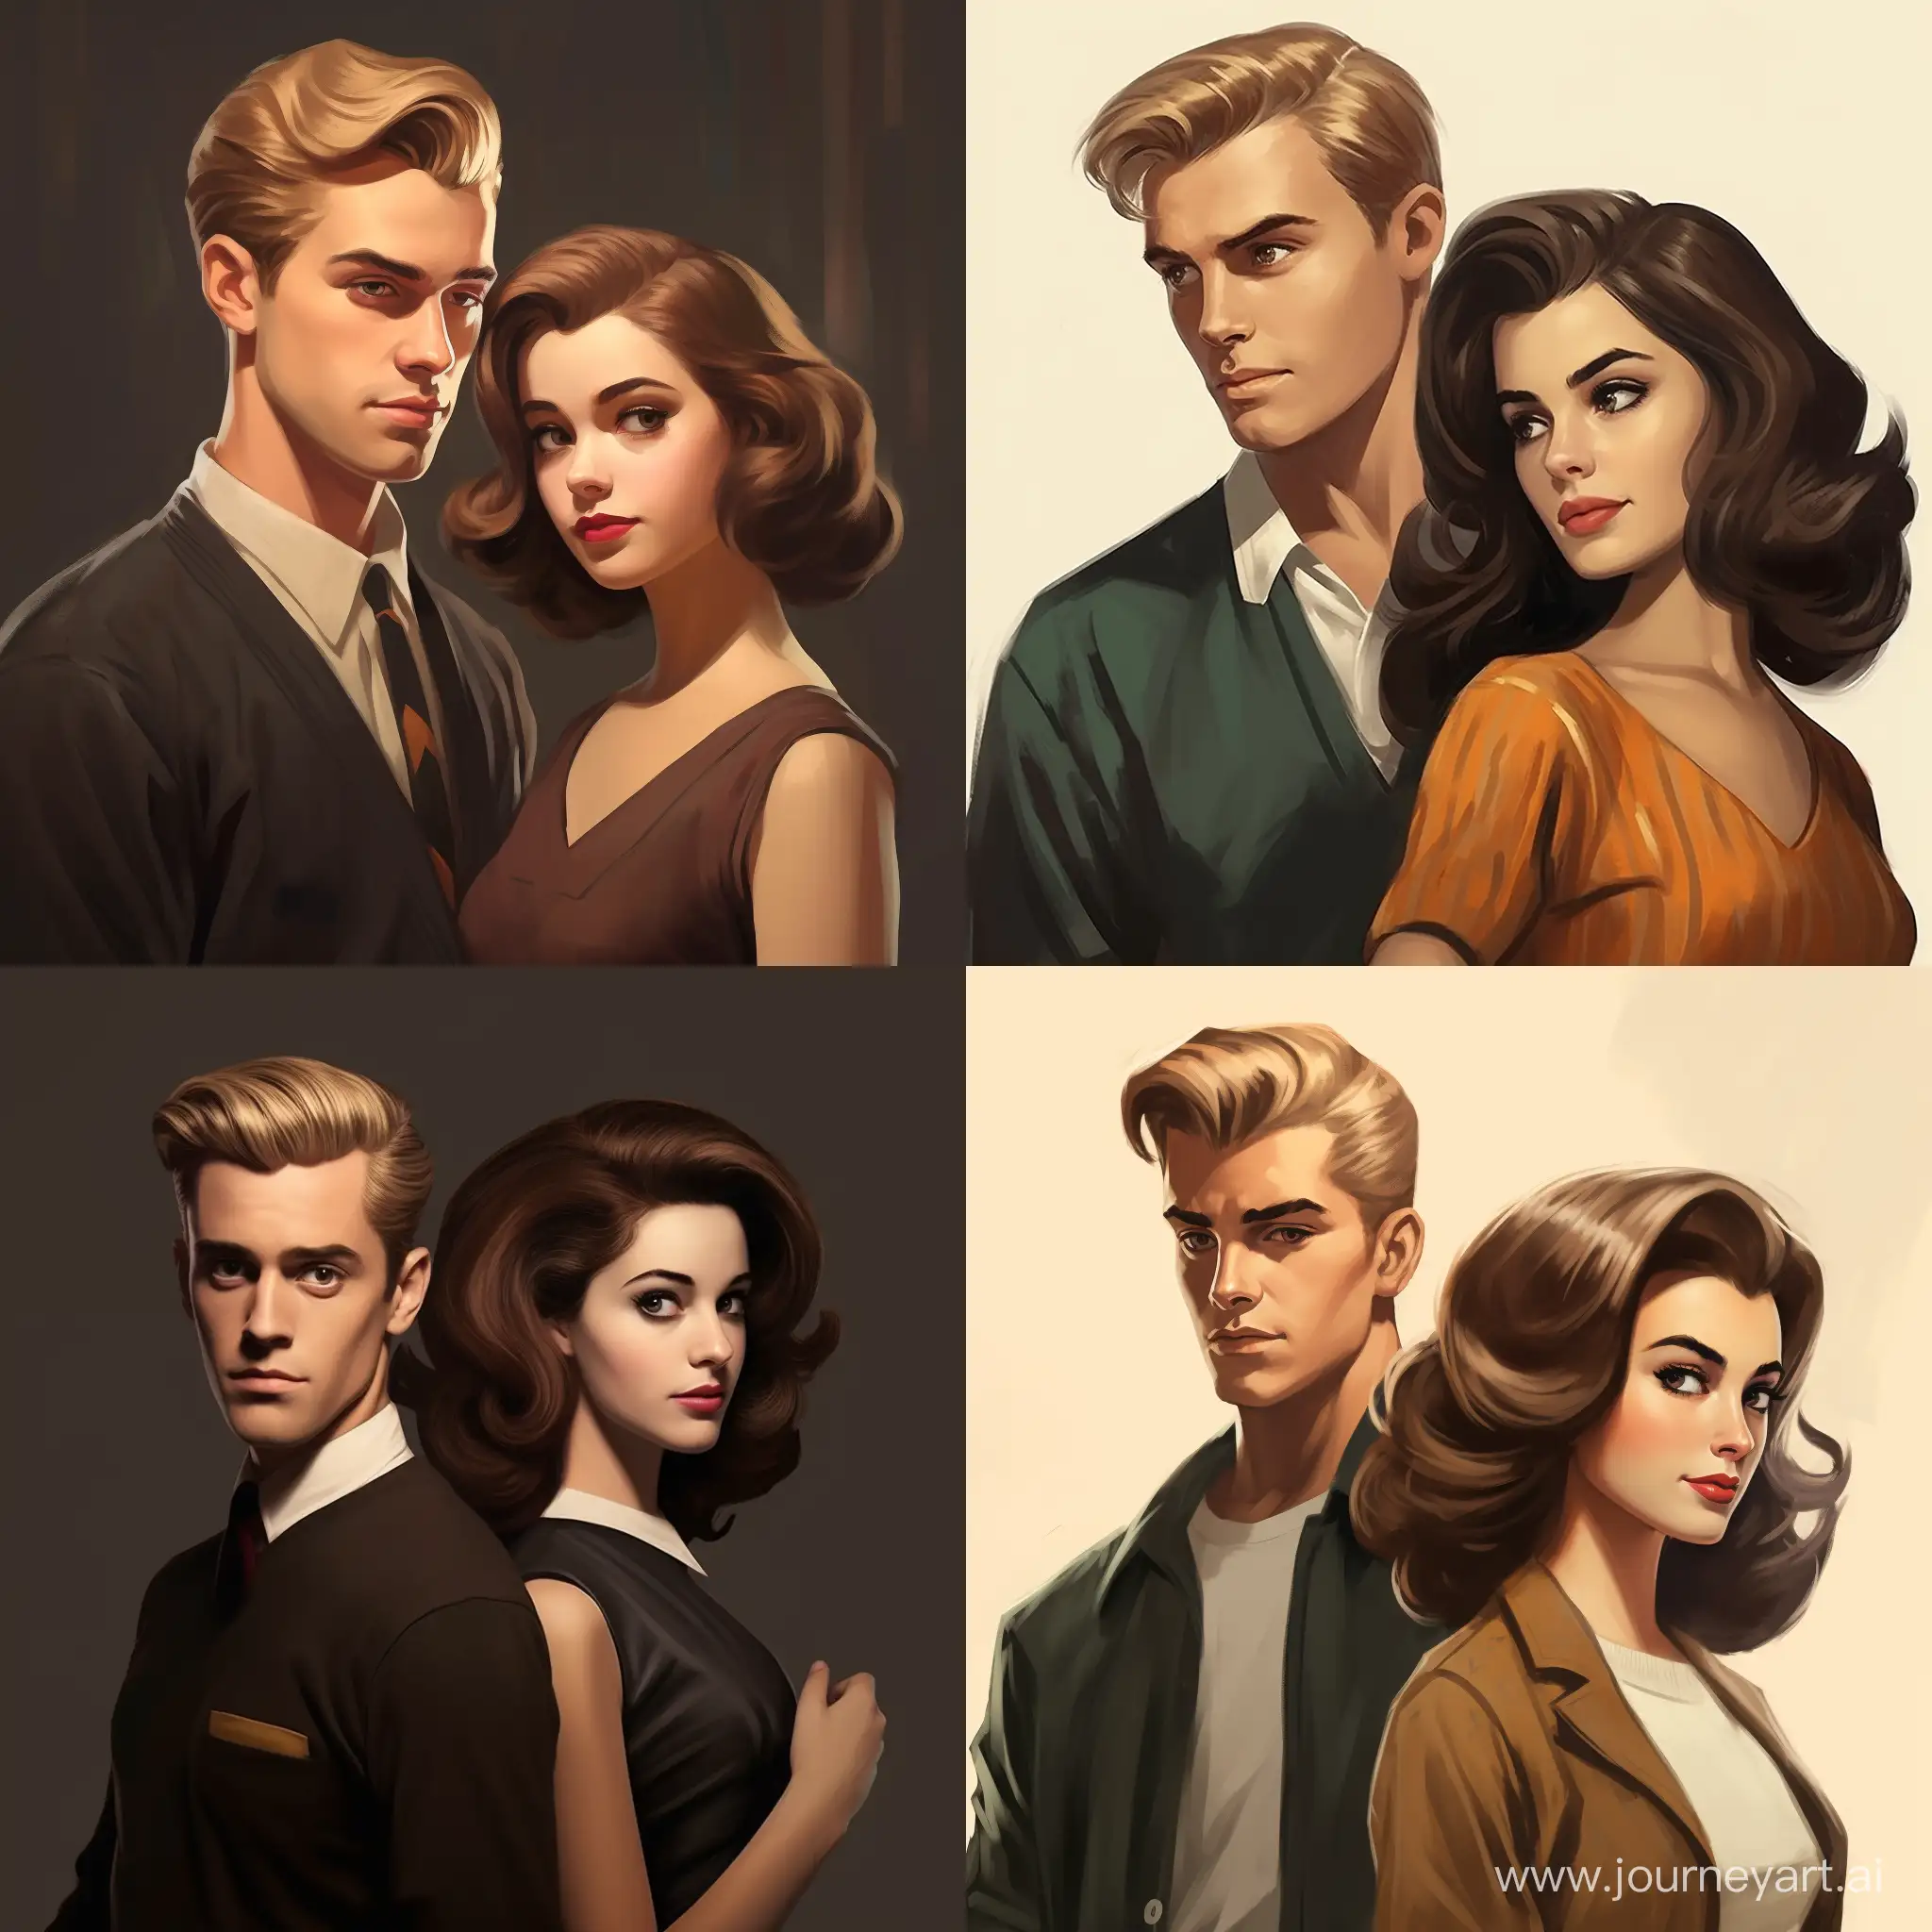 Draco-Malfoy-and-Hermione-Granger-Embrace-1960s-Glamour-in-Stunning-Portrait